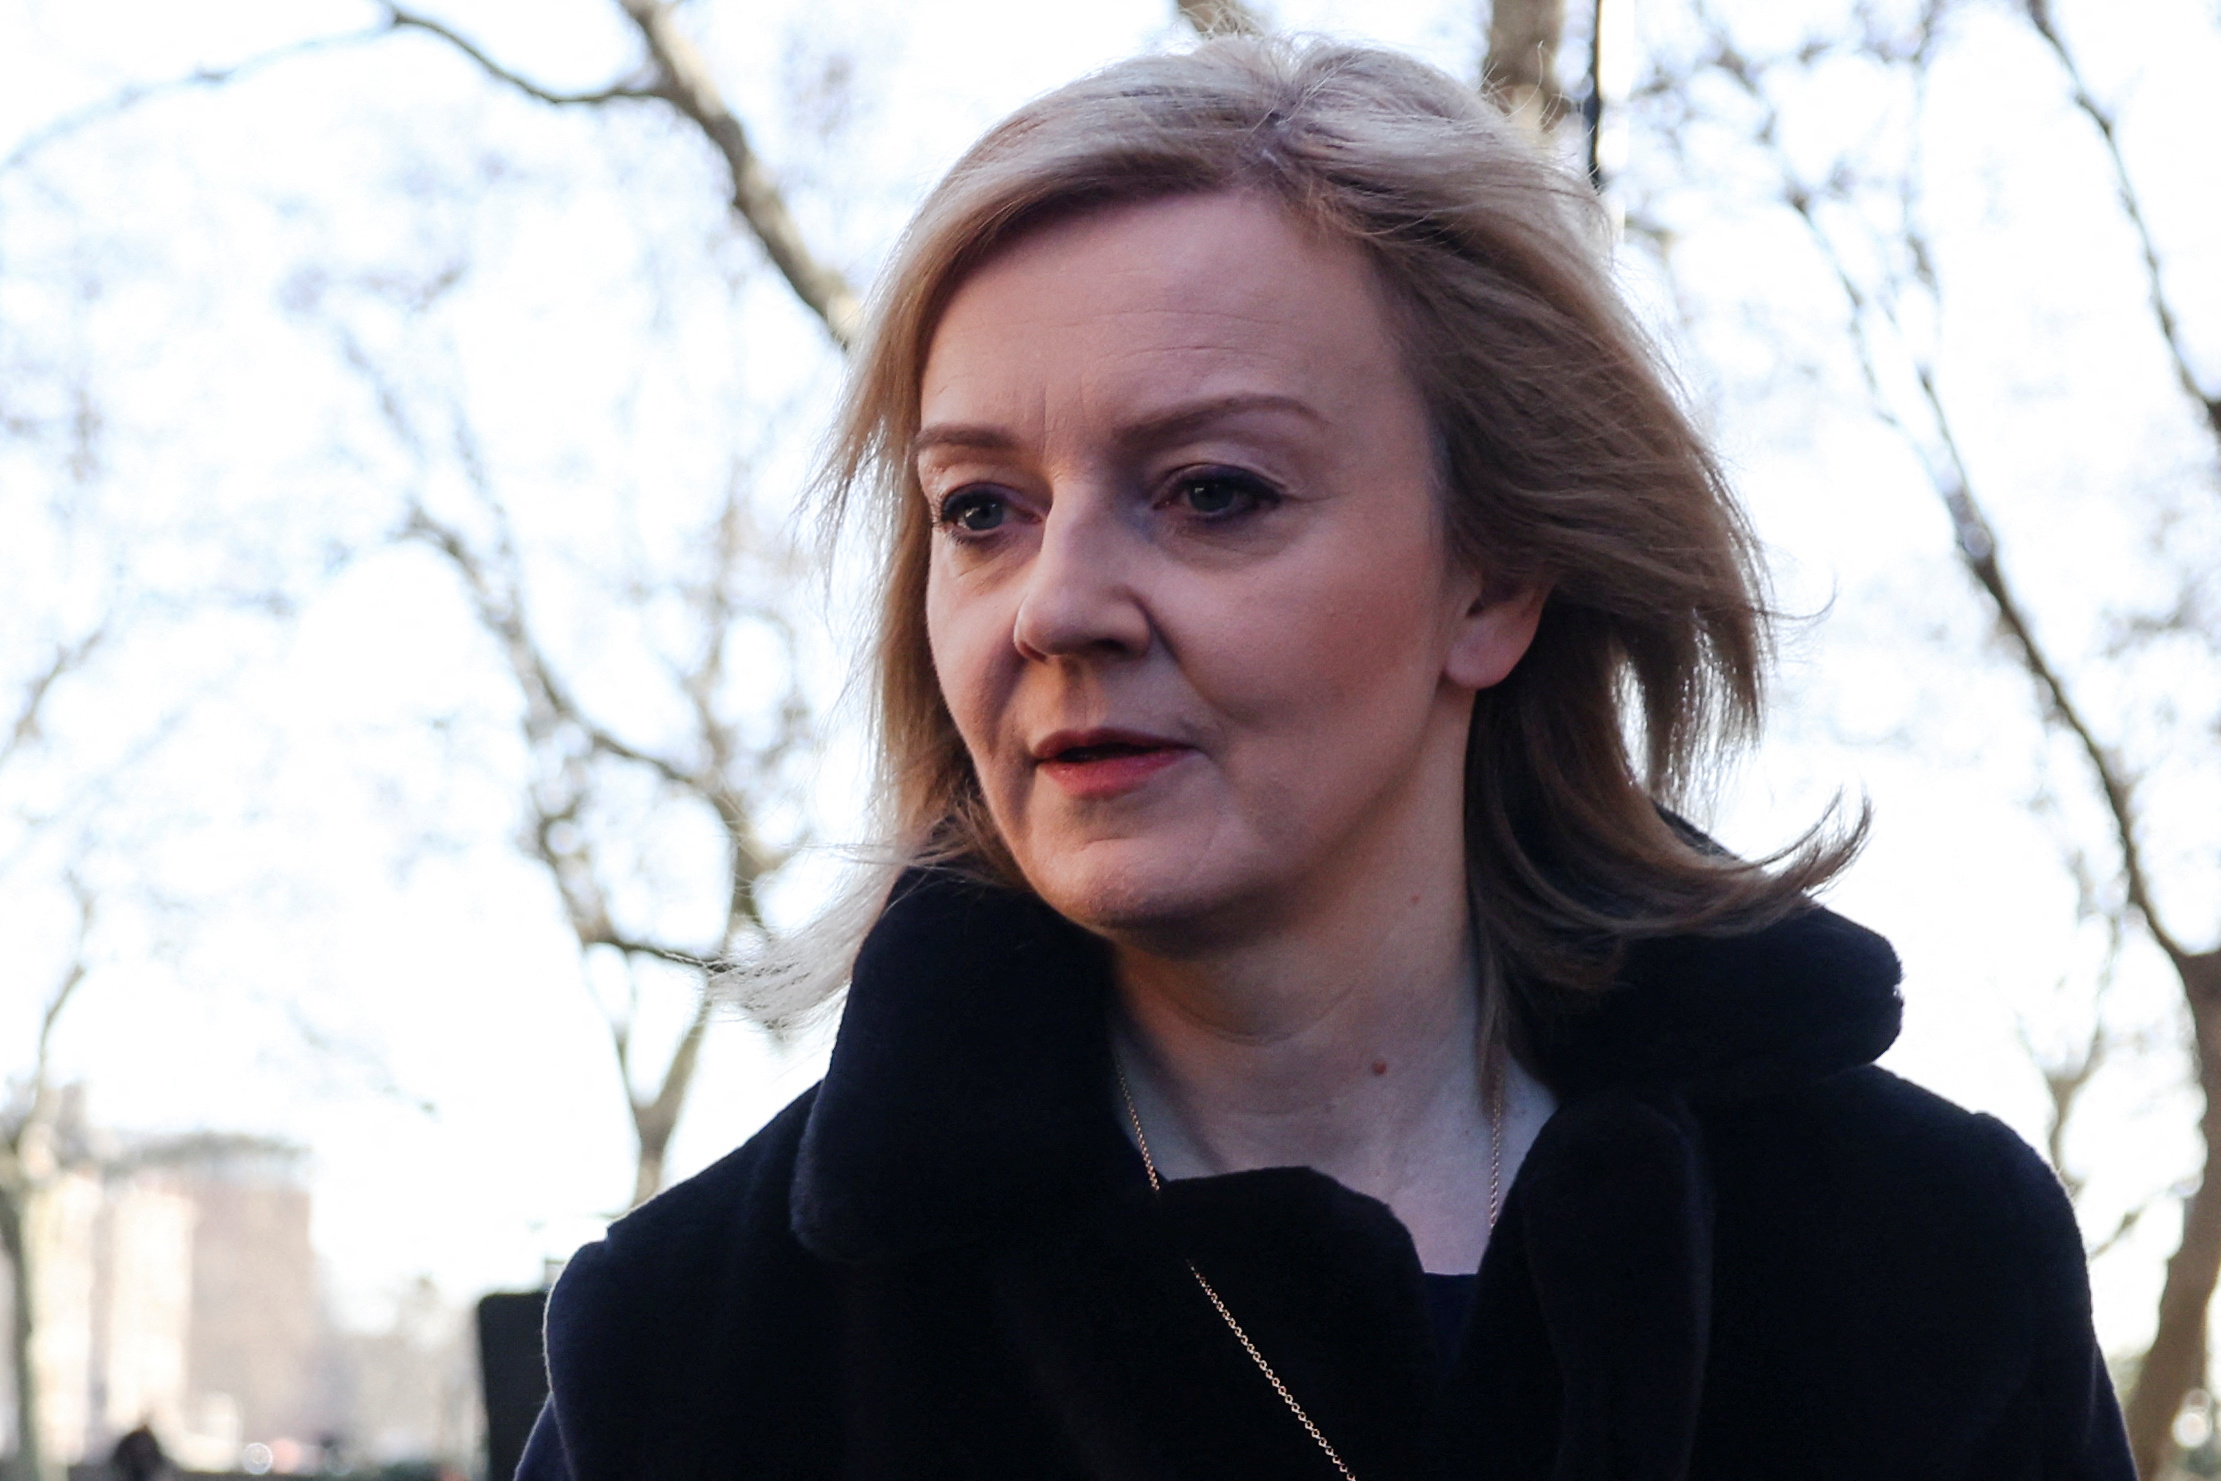 British Foreign Secretary Liz Truss pictured after an interview in Westminster, London, on February 23.